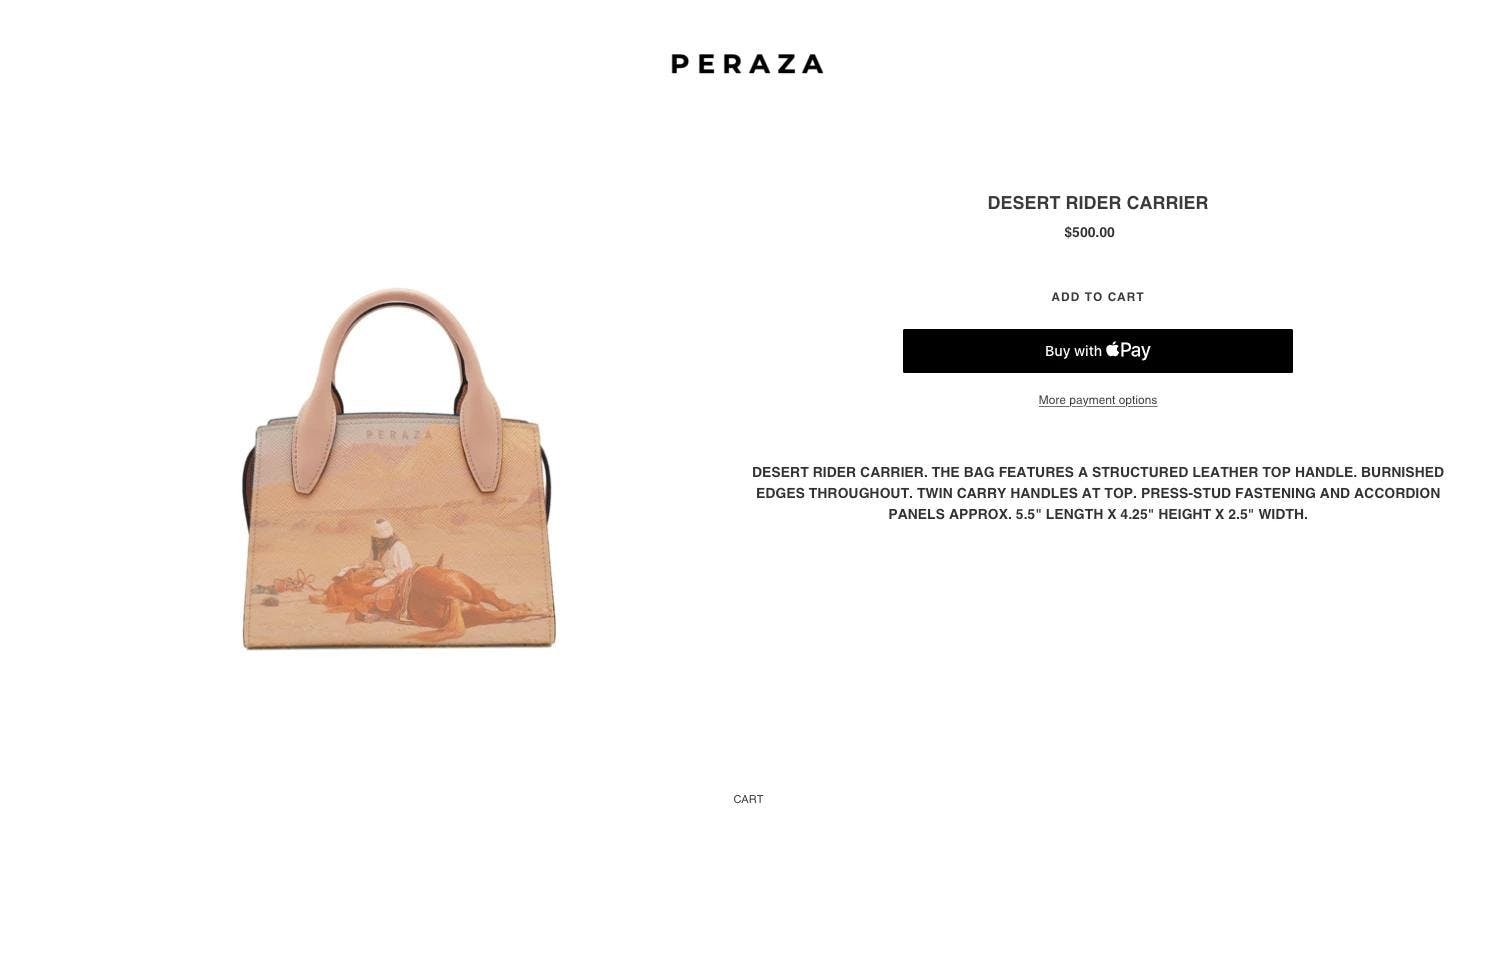 Peraza product page